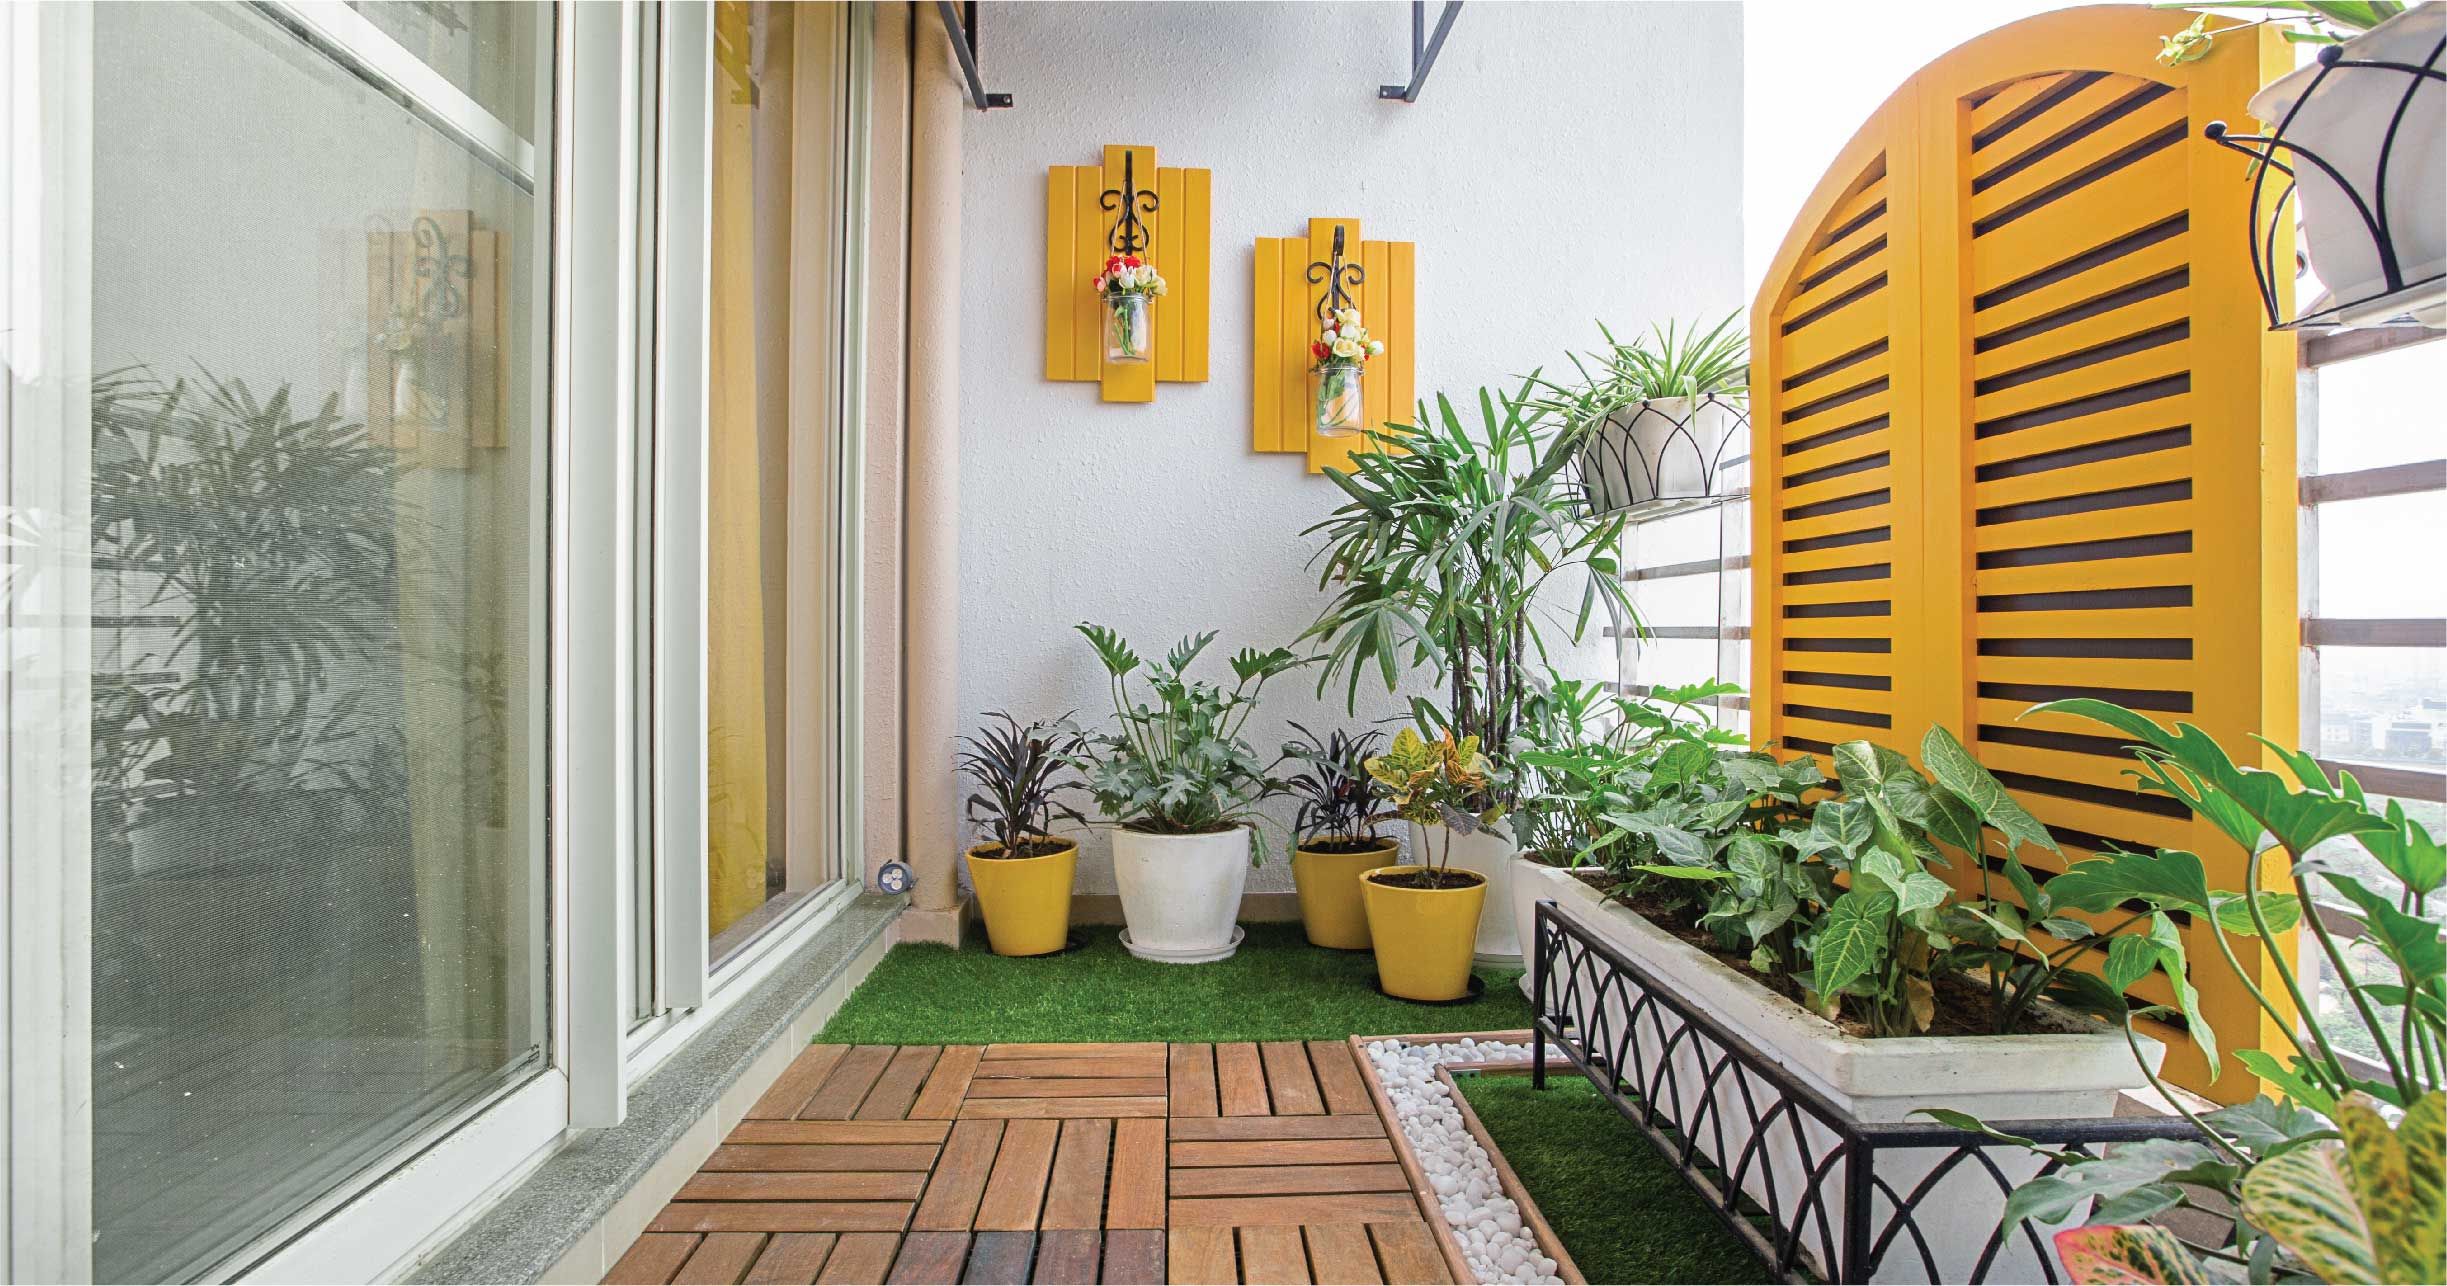 9 Easy Steps to Set Up a Stunning Balcony That's Low on Maintenance